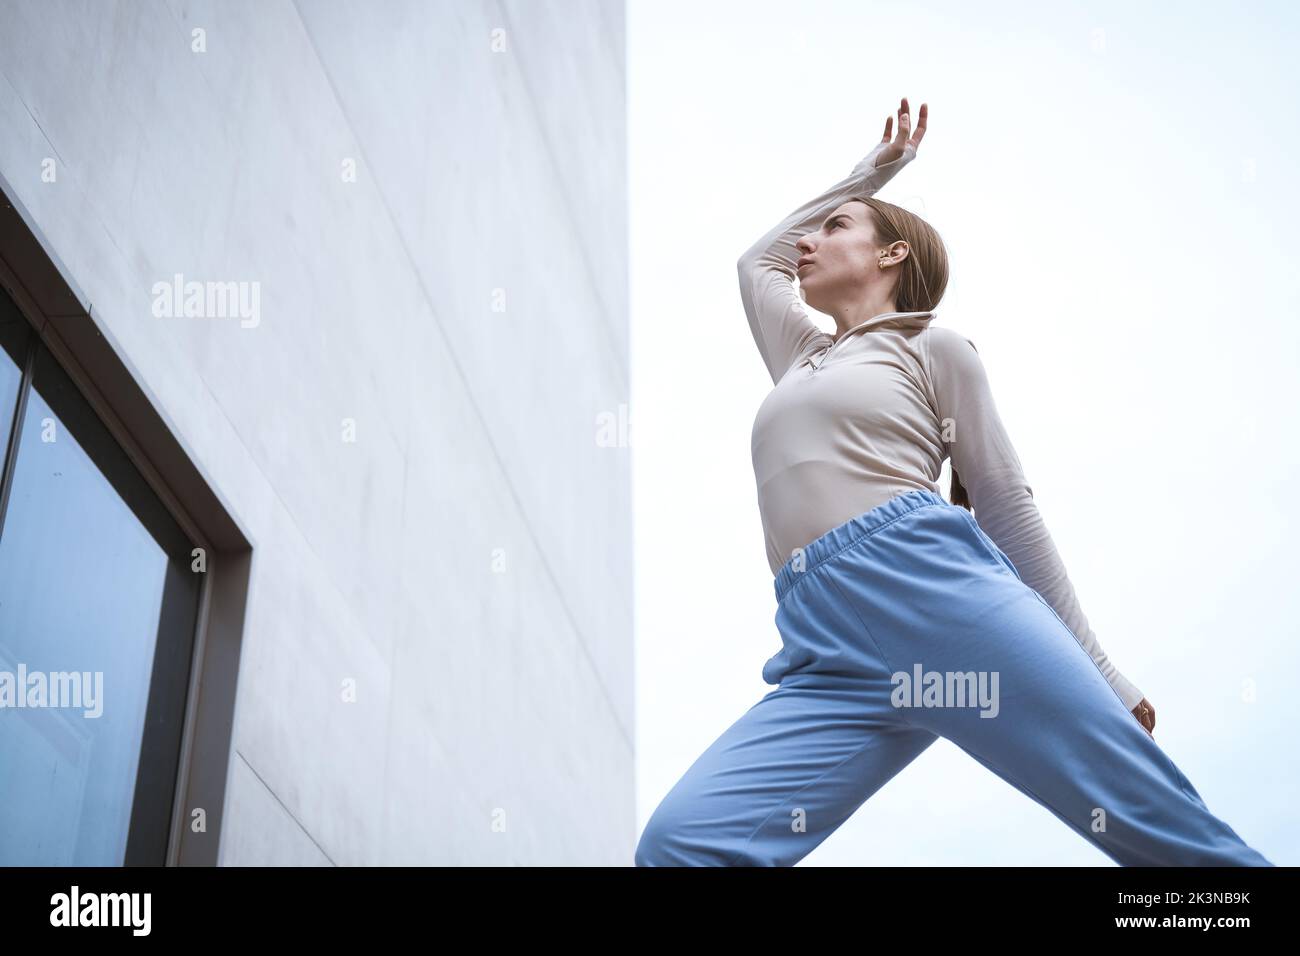 Girl in a blue pants stretching and dancing against grey wall Stock Photo